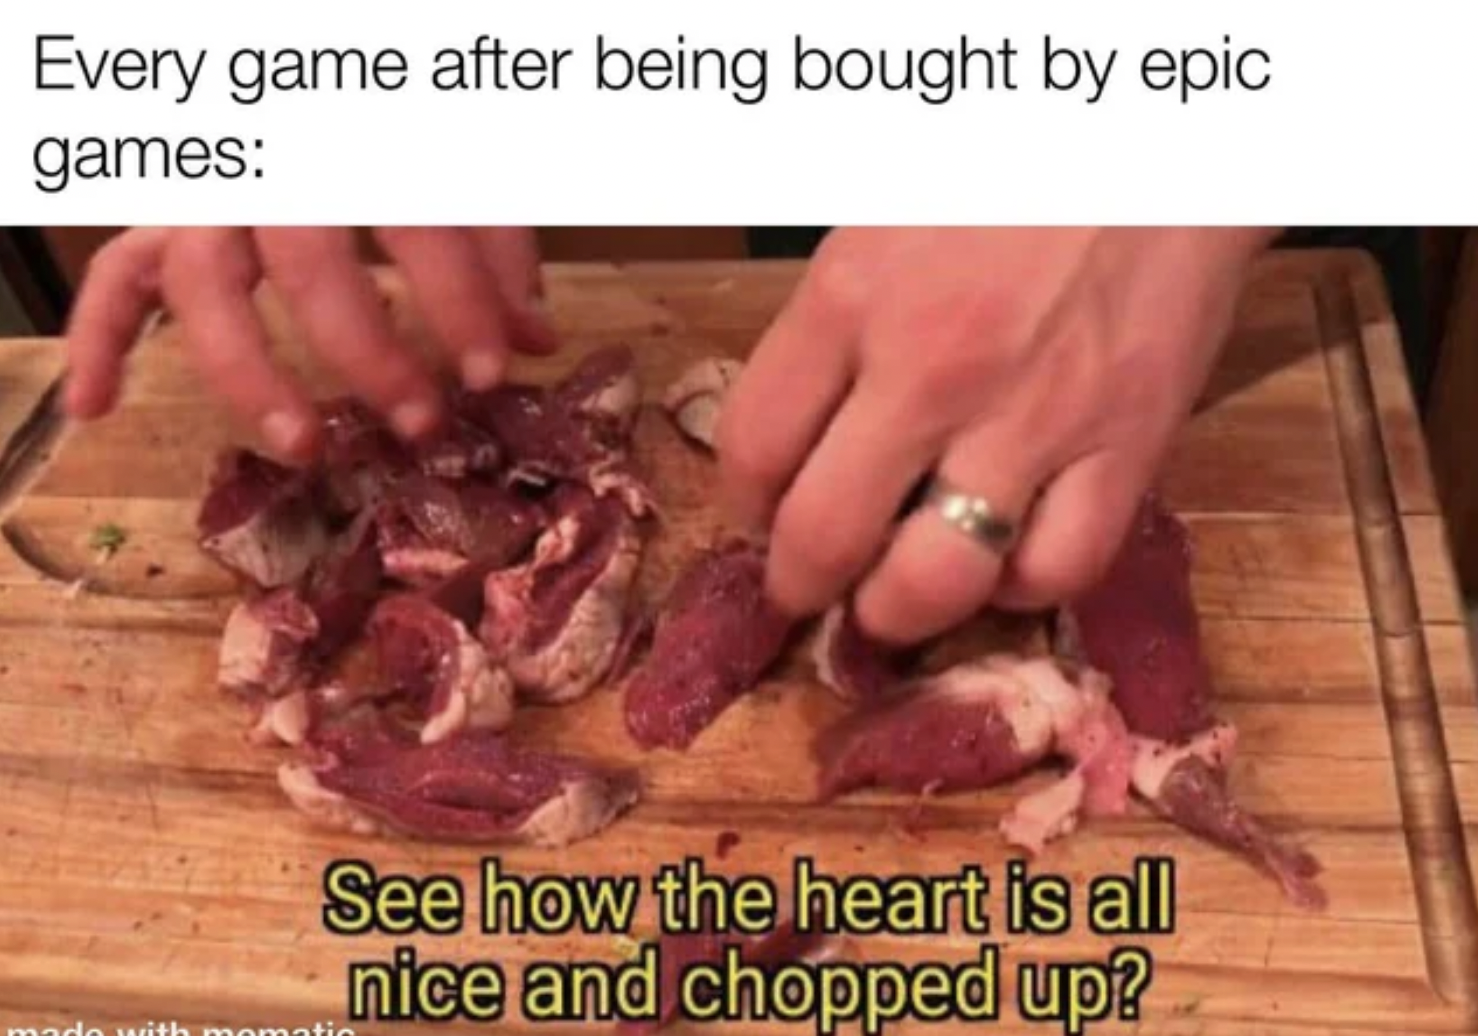 see how the heart is nice and chopped up - Every game after being bought by epic games See how the heart is all nice and chopped up?